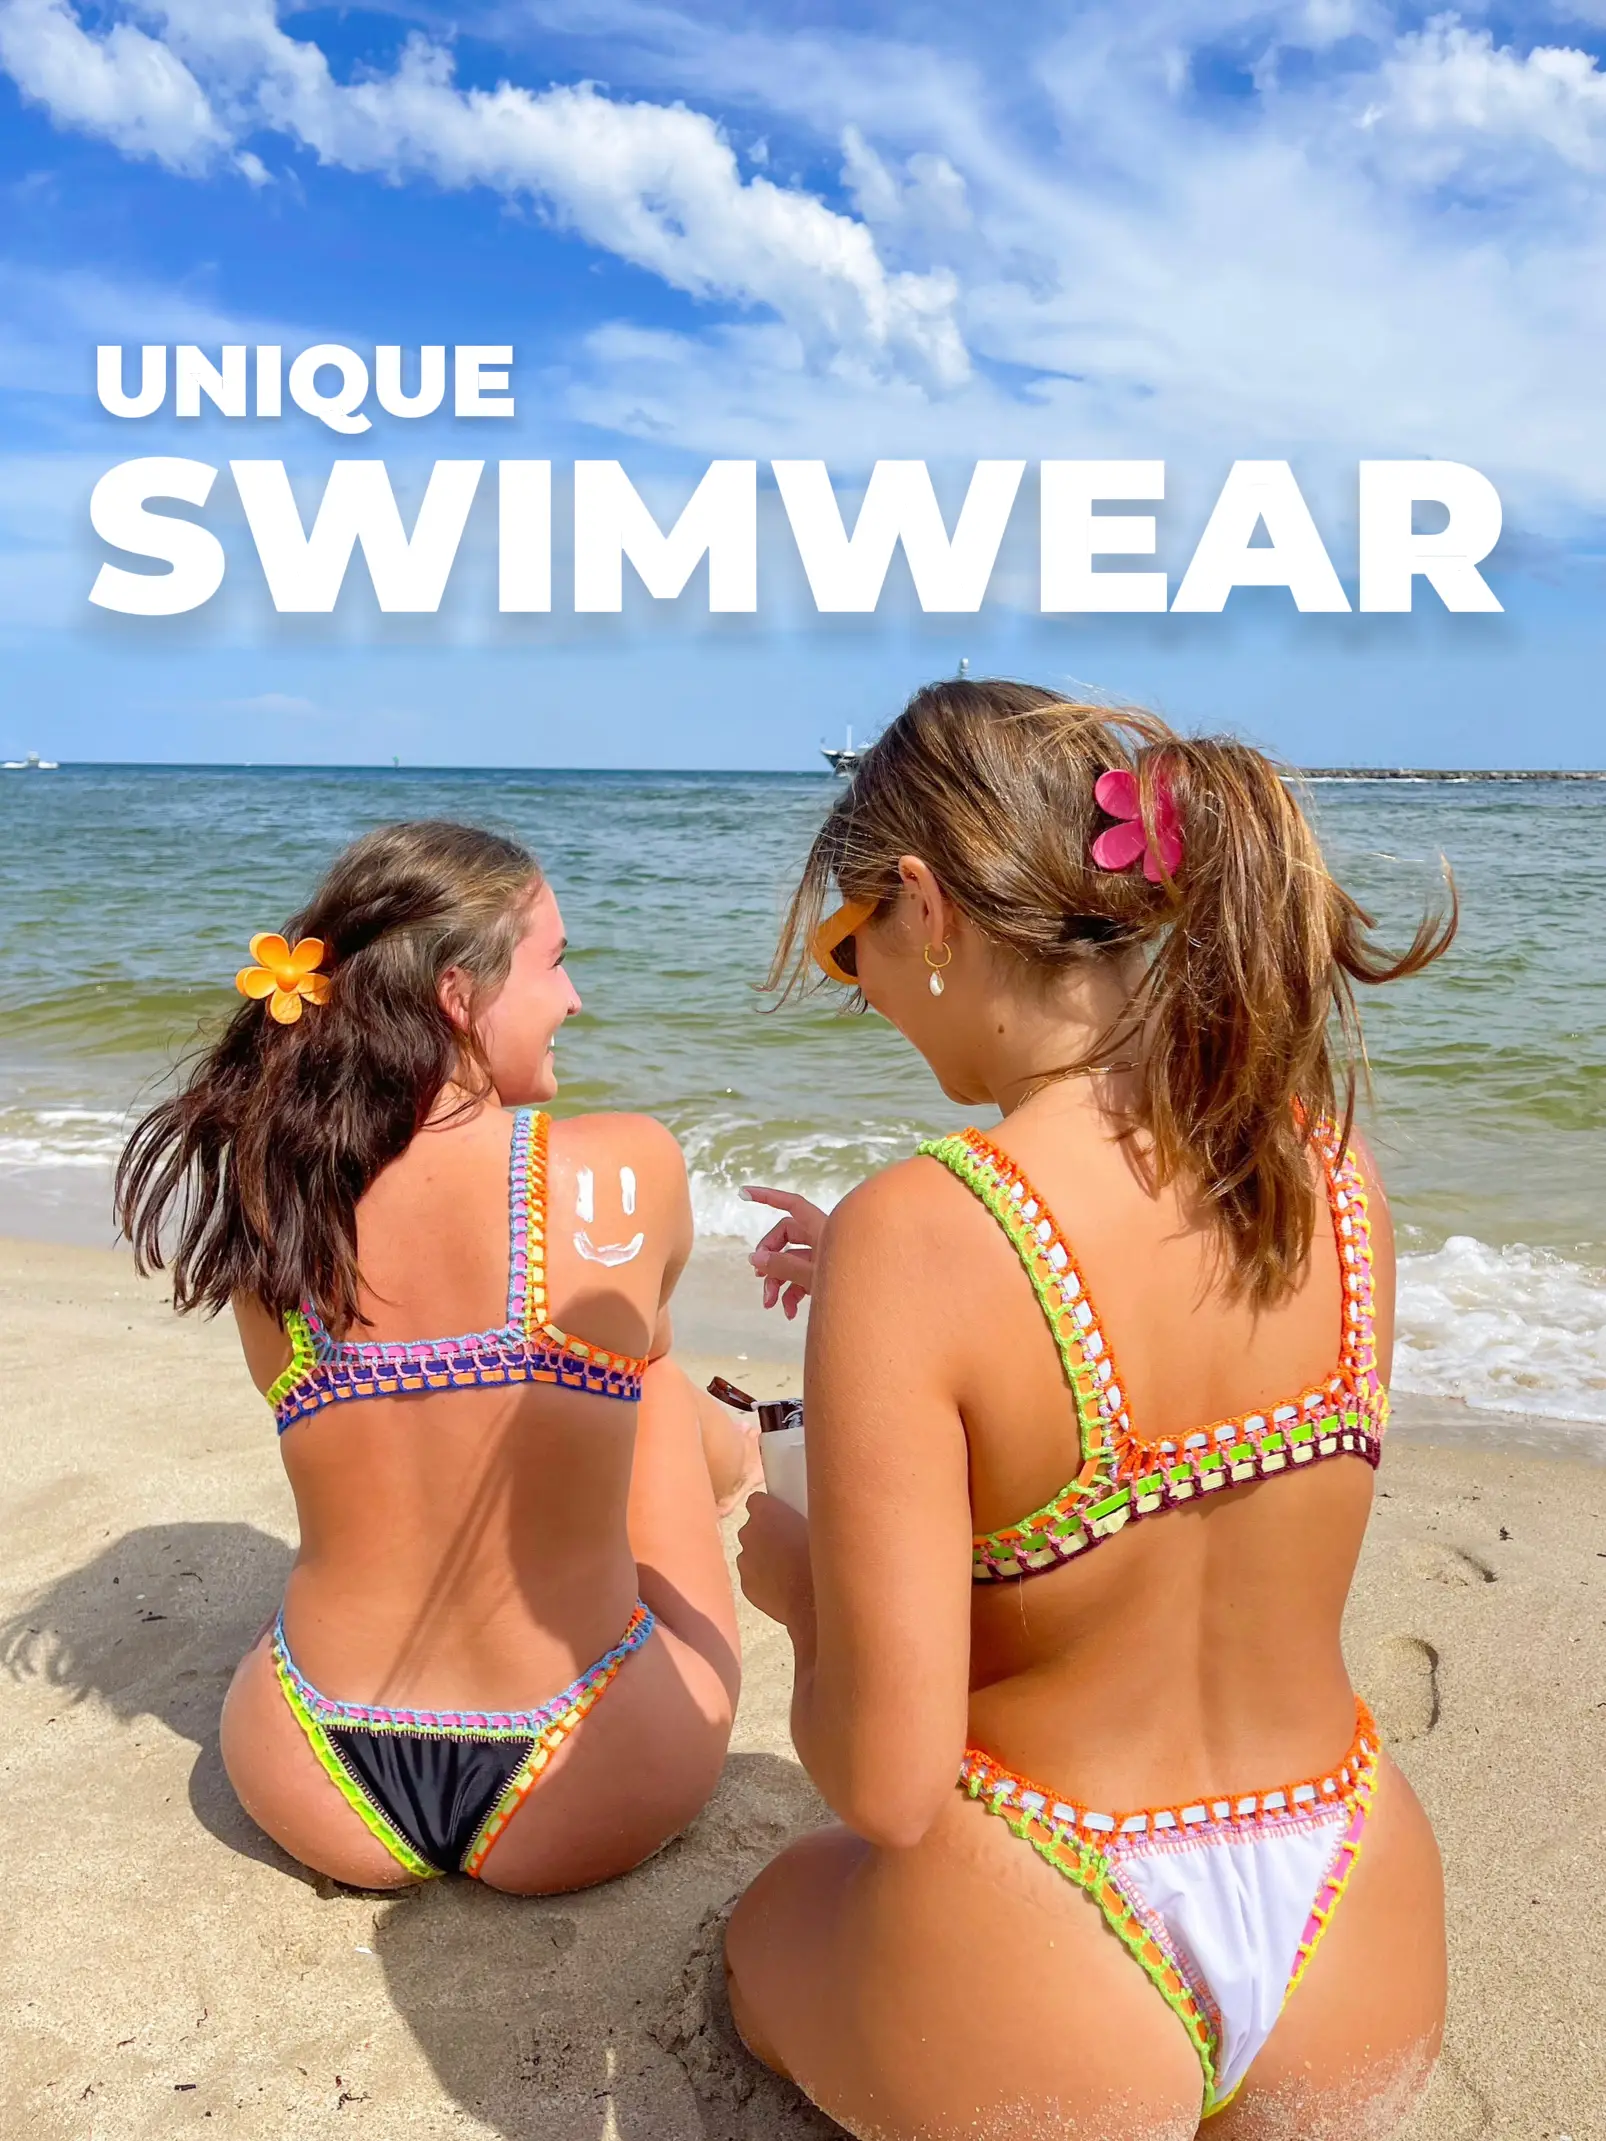 New swimsuit line by Albion Fit